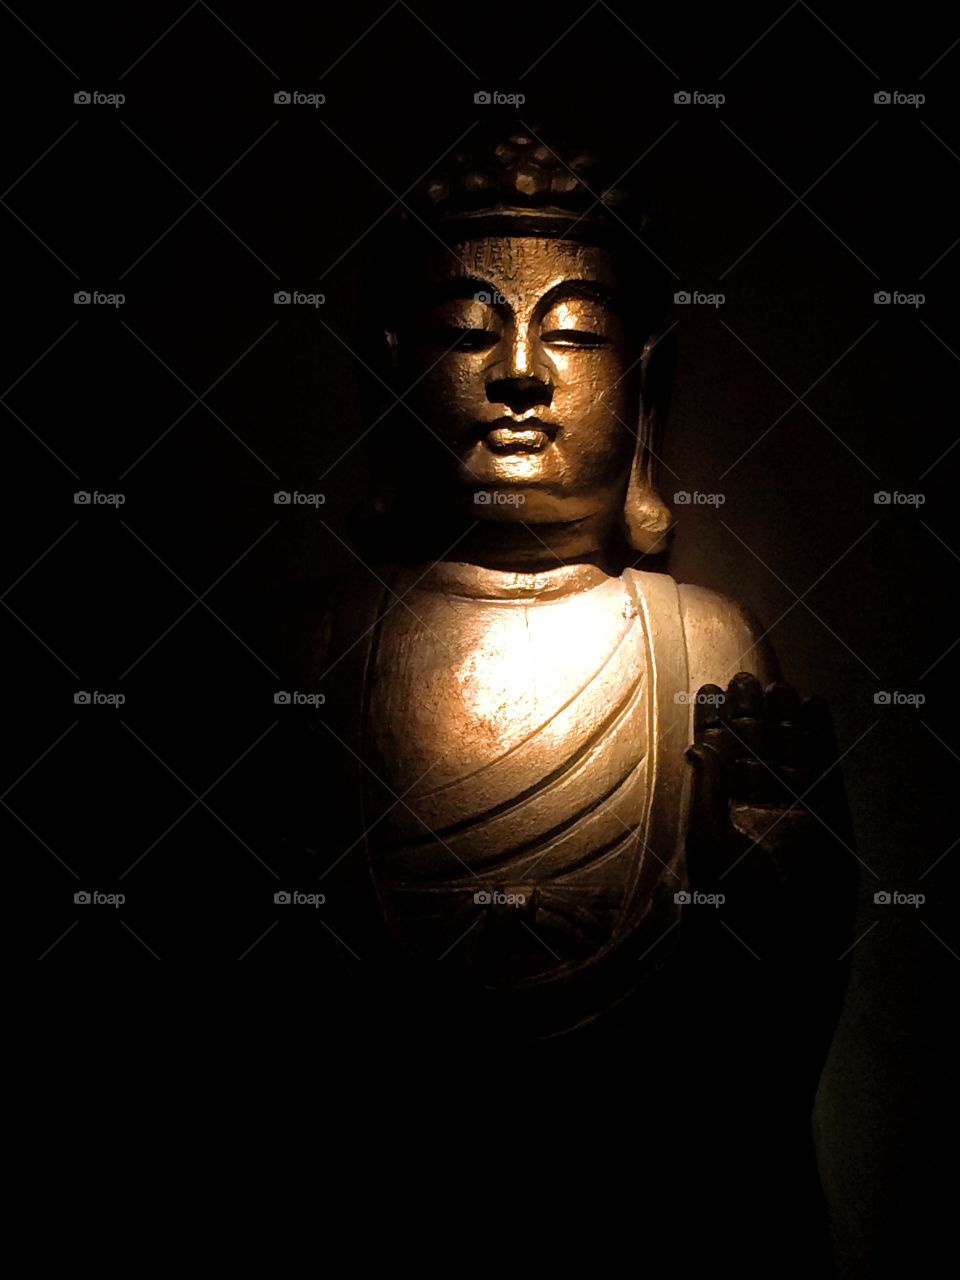 Blessings. A statue of Buddha in spotlight at a meditation hall.